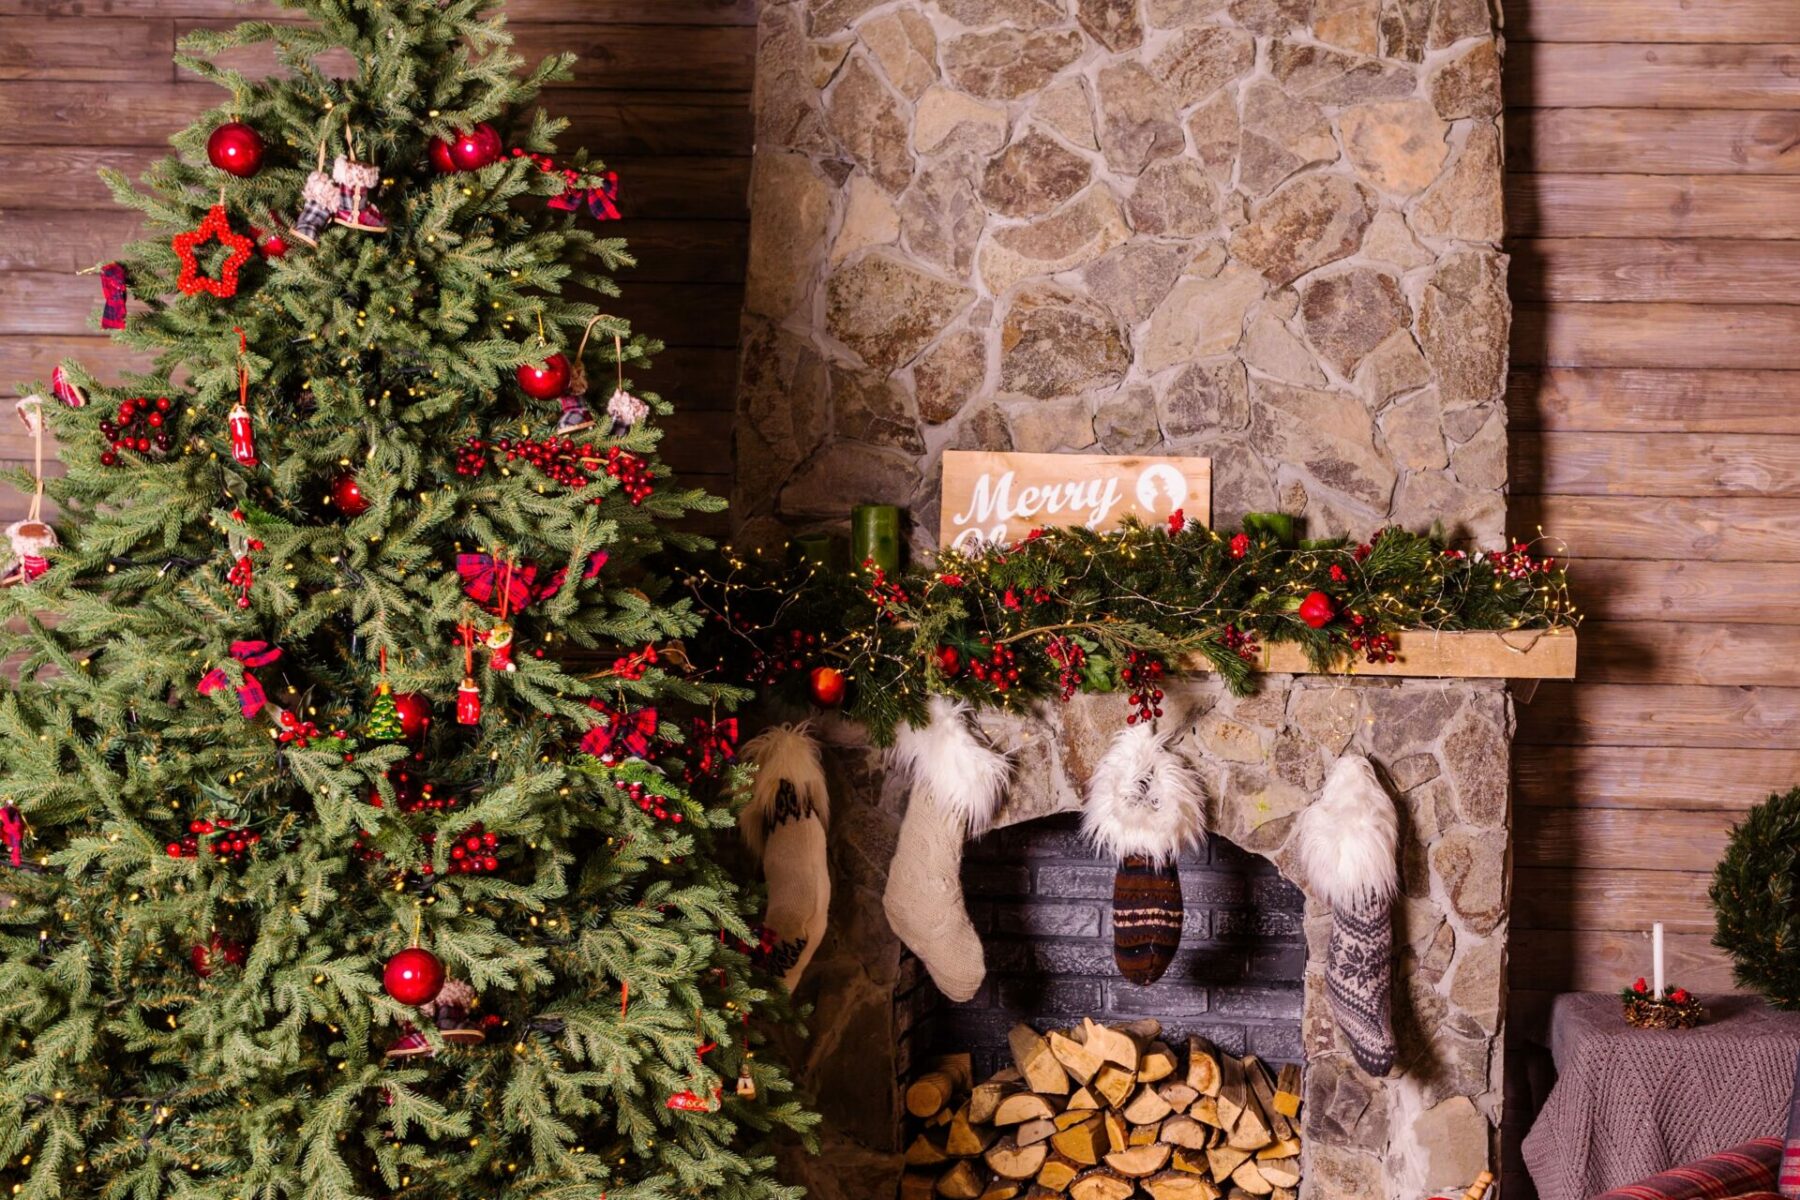 Christmas Tree near Wood Fire Place with Stockings Being Hung